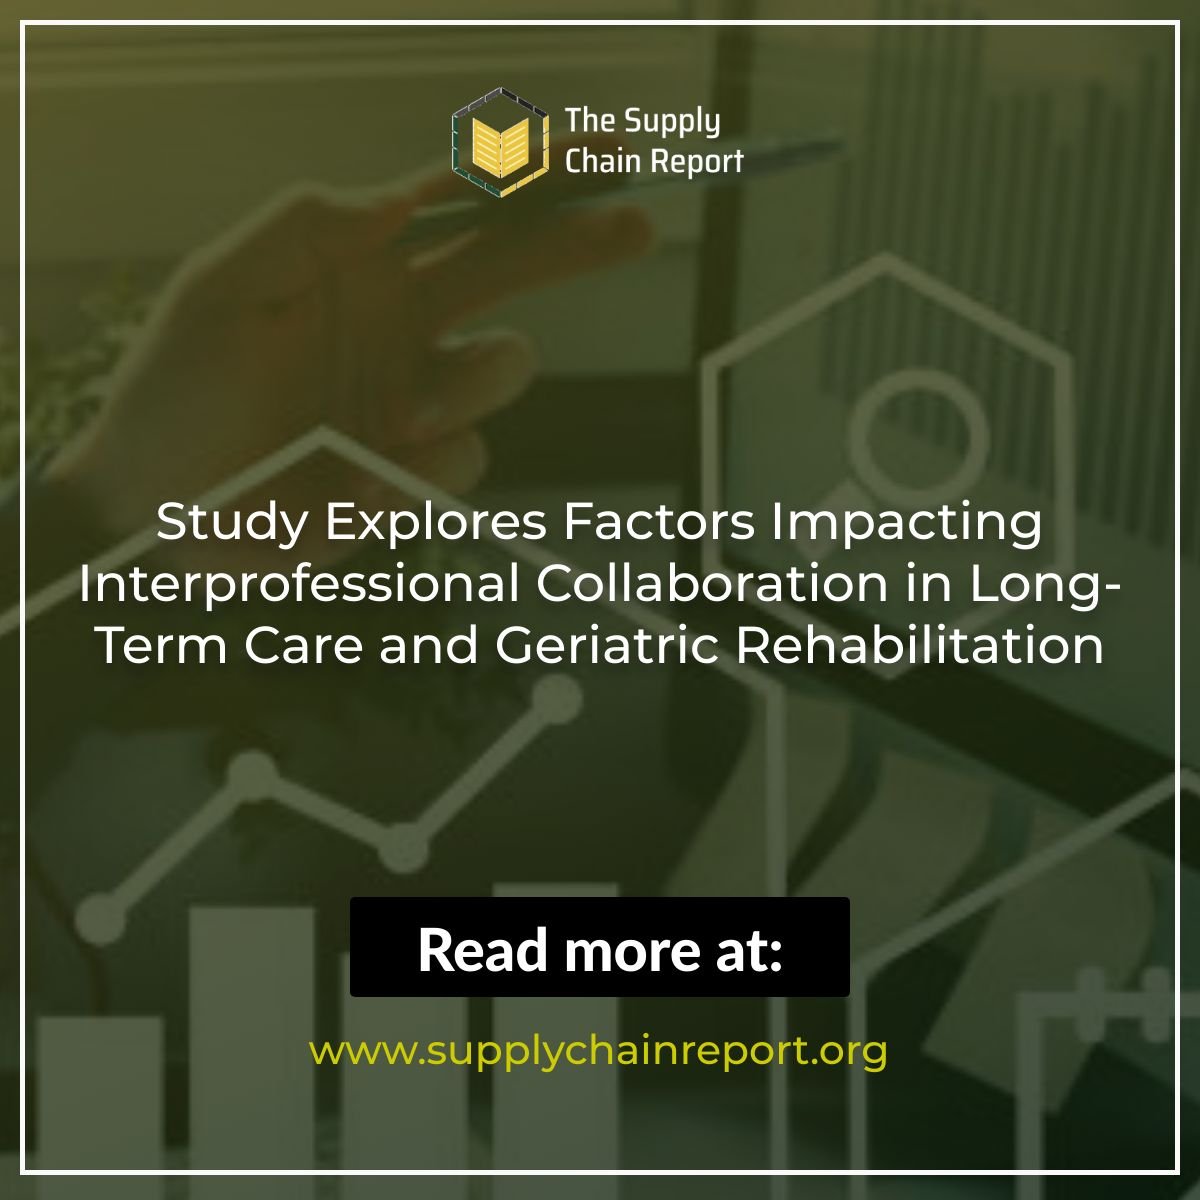 Study Explores Factors Impacting Interprofessional Collaboration in Long-Term Care and Geriatric Rehabilitation
Read more here: supplychainreport.org/study-explores-
#interprofessionalcollaboration #longtermcare #geriatricrehabilitation #supplychainreport #news